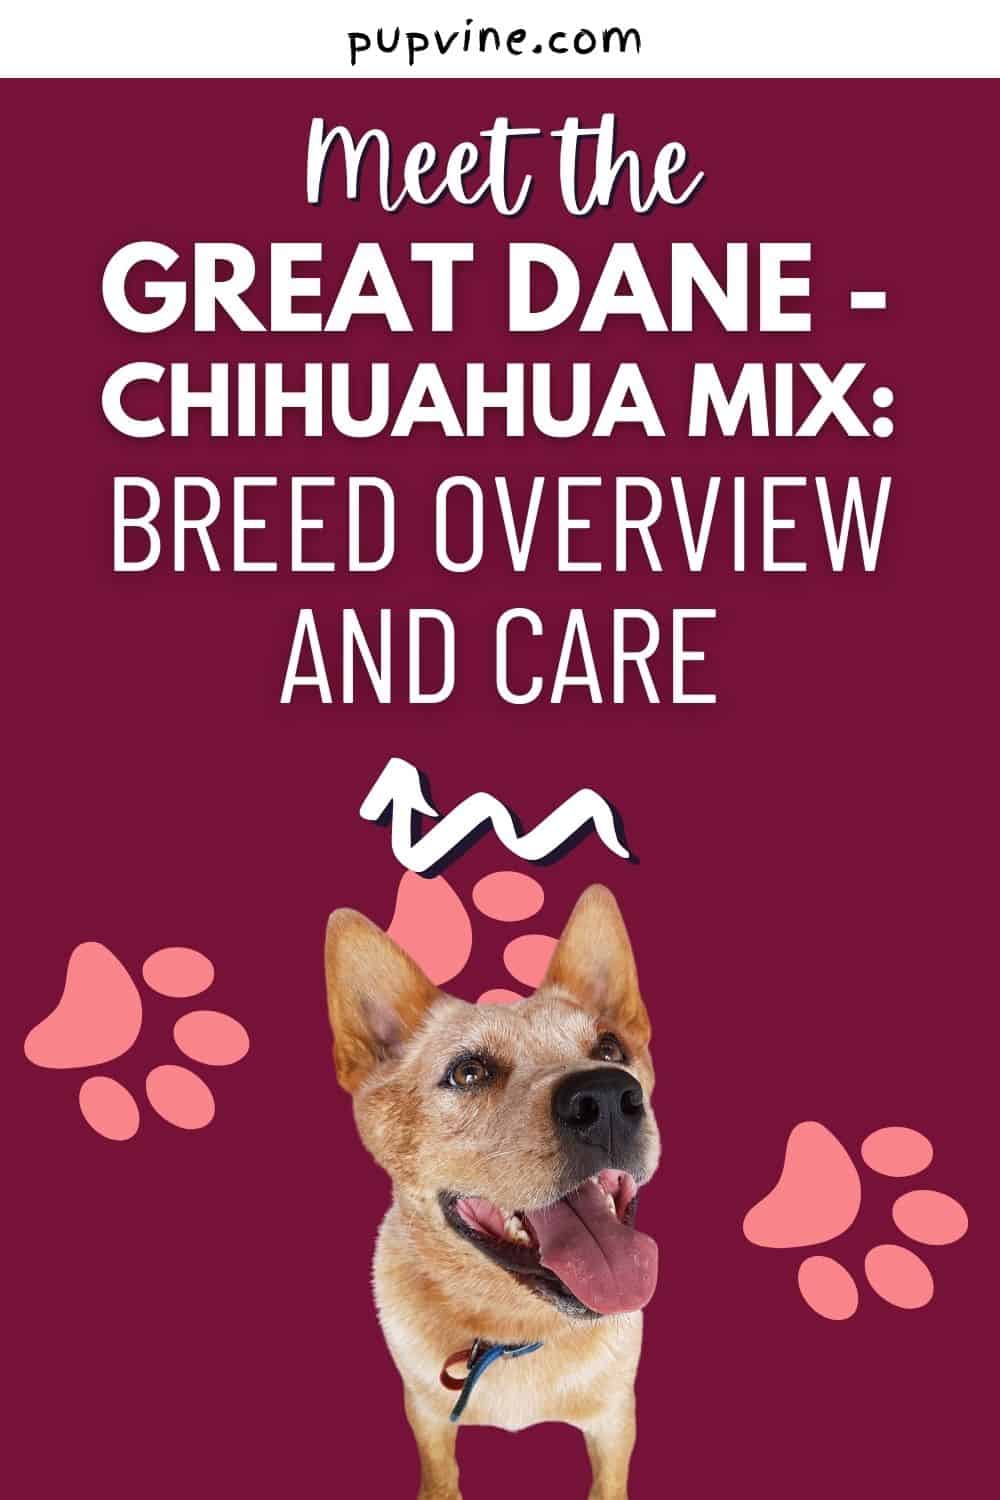 Meet the Great Dane - Chihuahua Mix: Breed Overview and Care